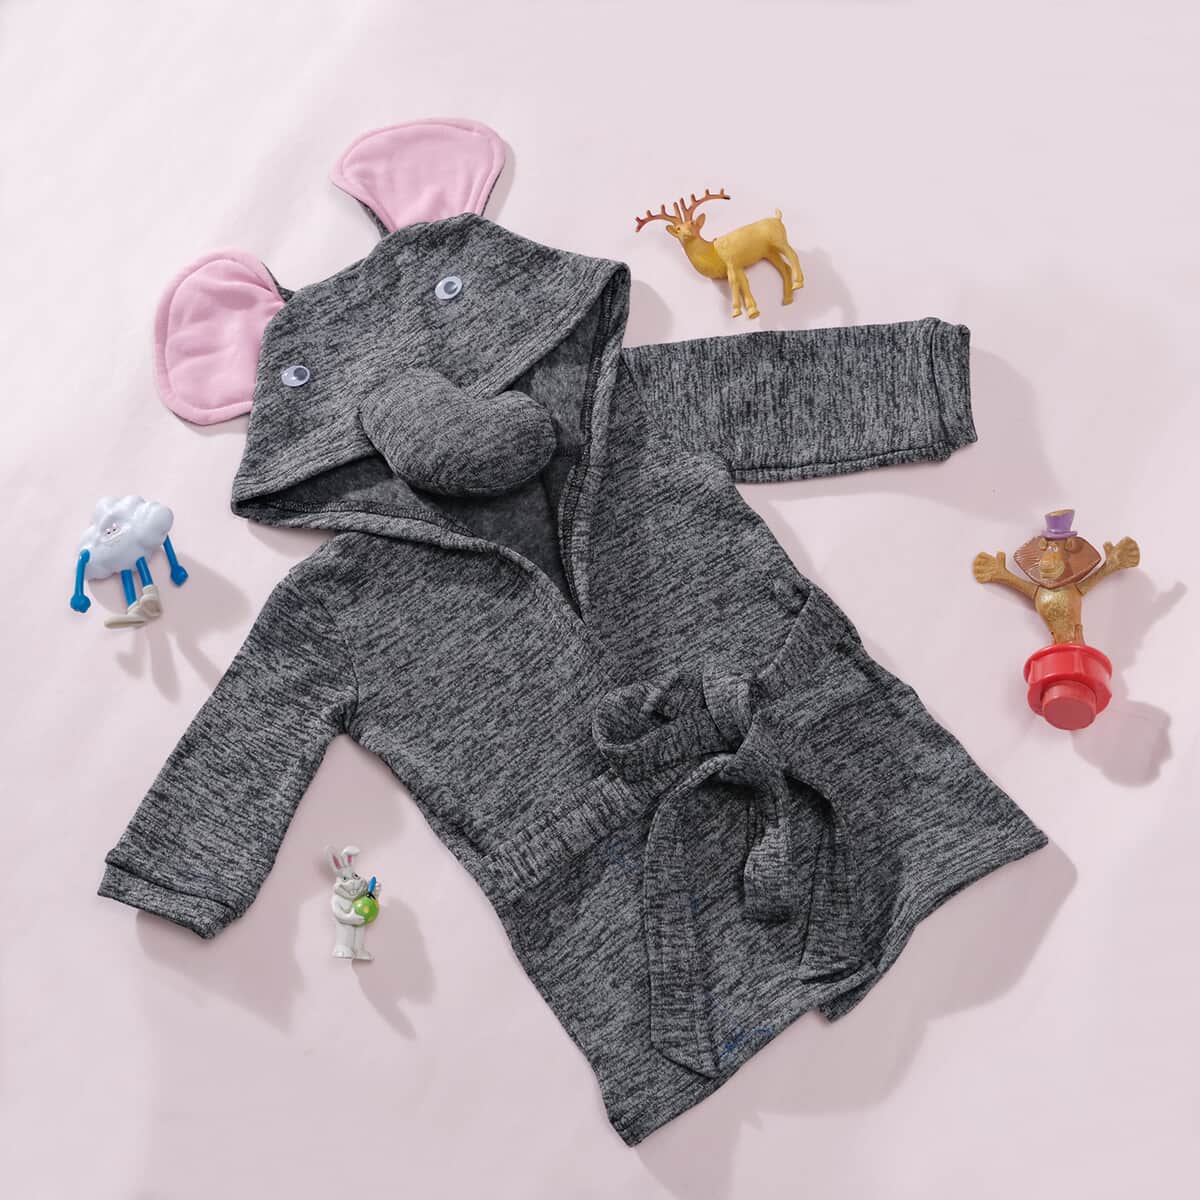 Dark Grey and Pink Elephant Pattern 100% Cotton Knitted Soft Hooded Toddler Baby Bath Towel (26"x11.5") image number 1